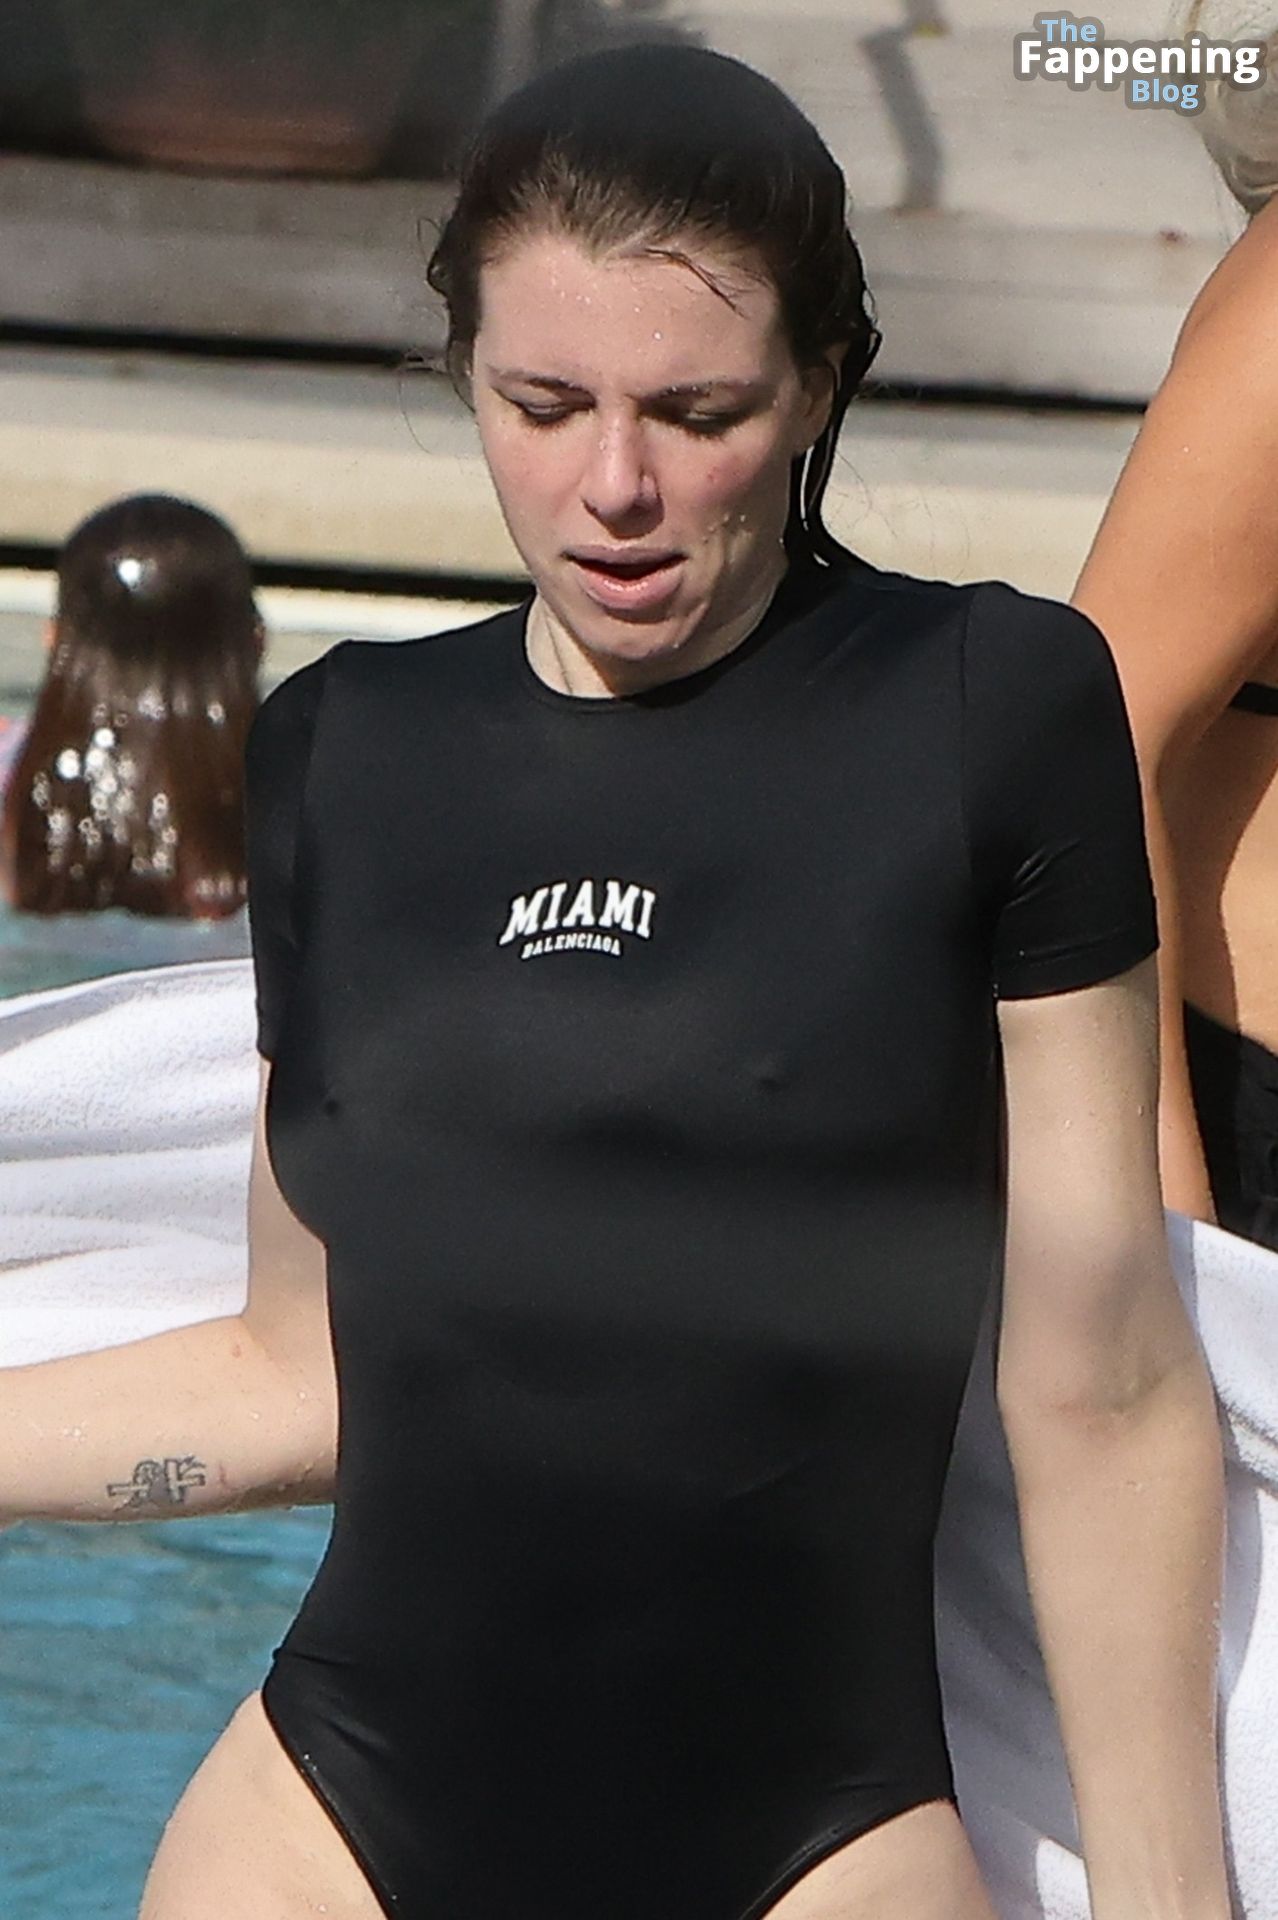 Julia Fox Sports Very Modest Swimsuit for a Day at the Pool in Miami (68 Photos)